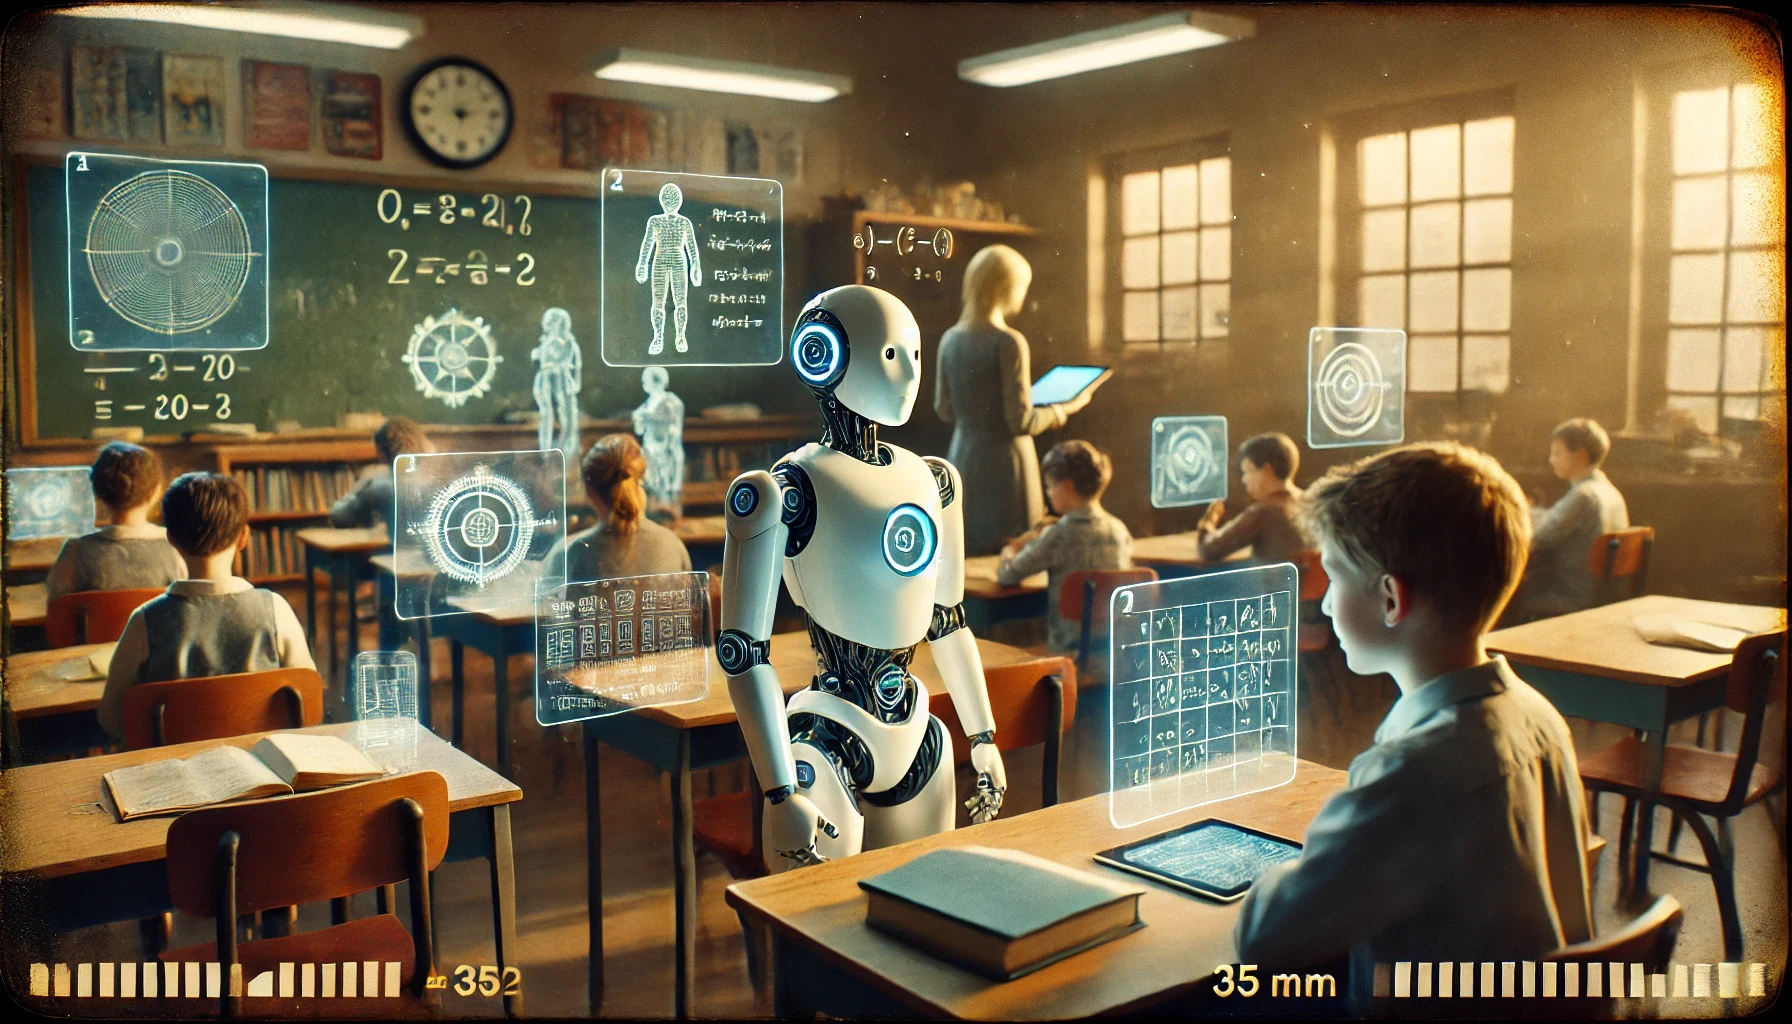 How is artificial intelligence used in education?